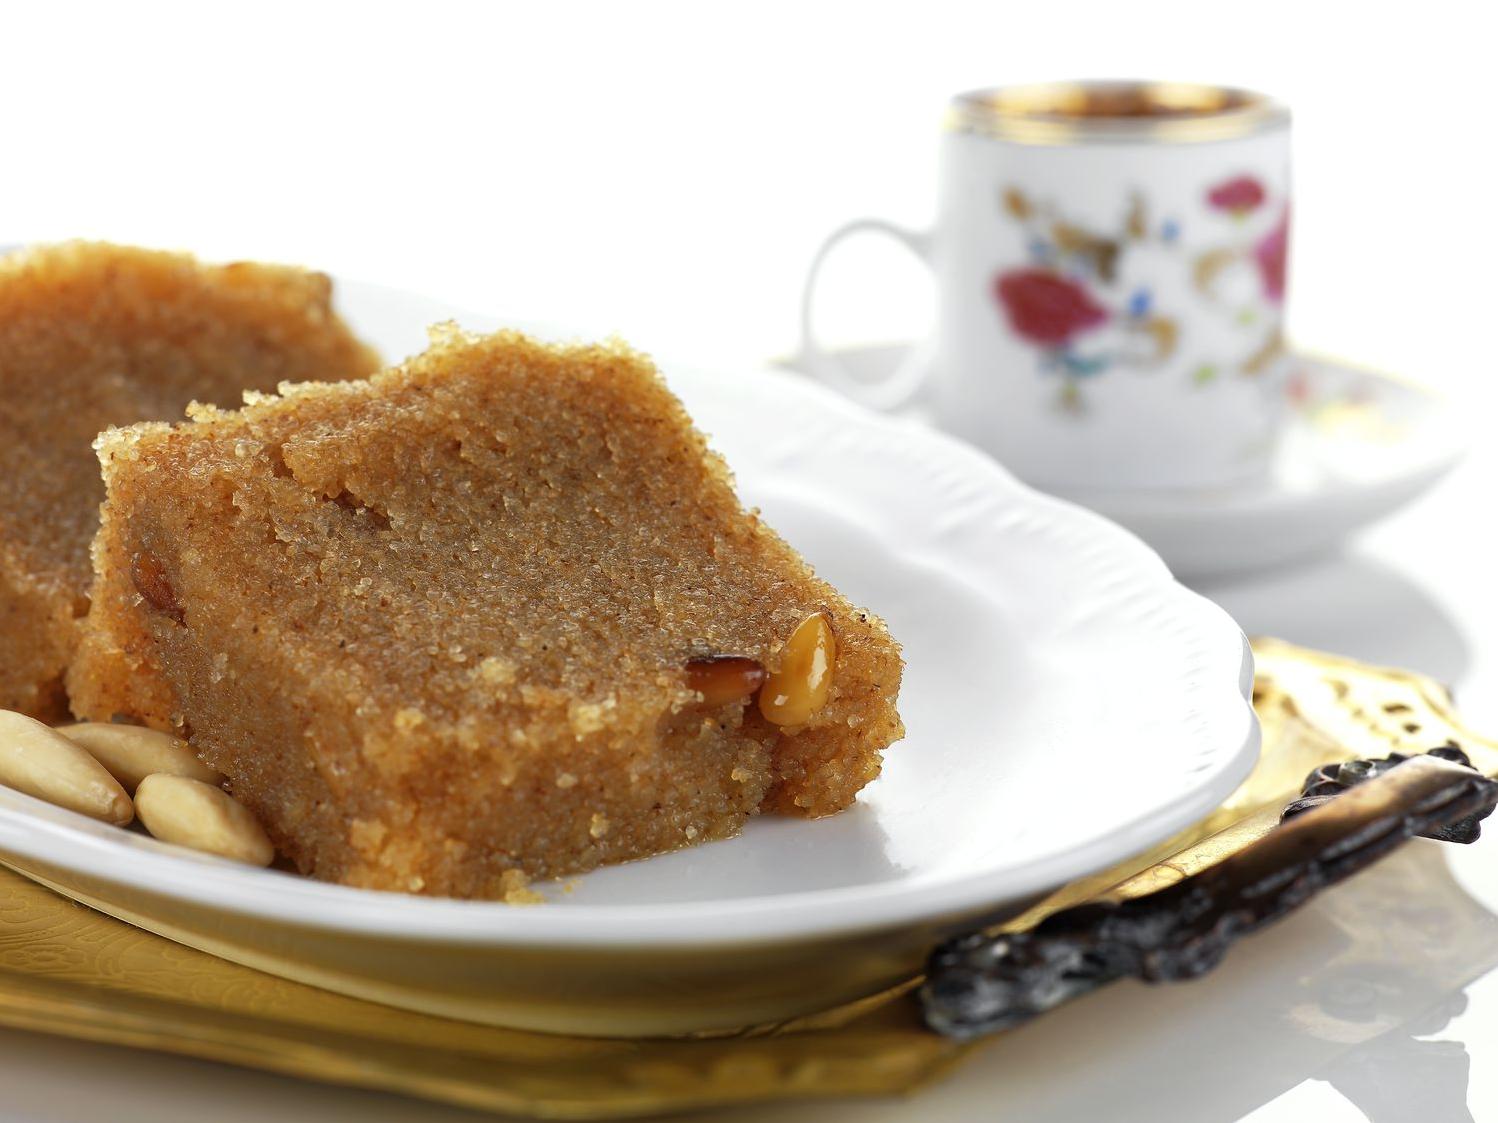  Halva is a traditional Greek dessert that can be enjoyed any time of the day.